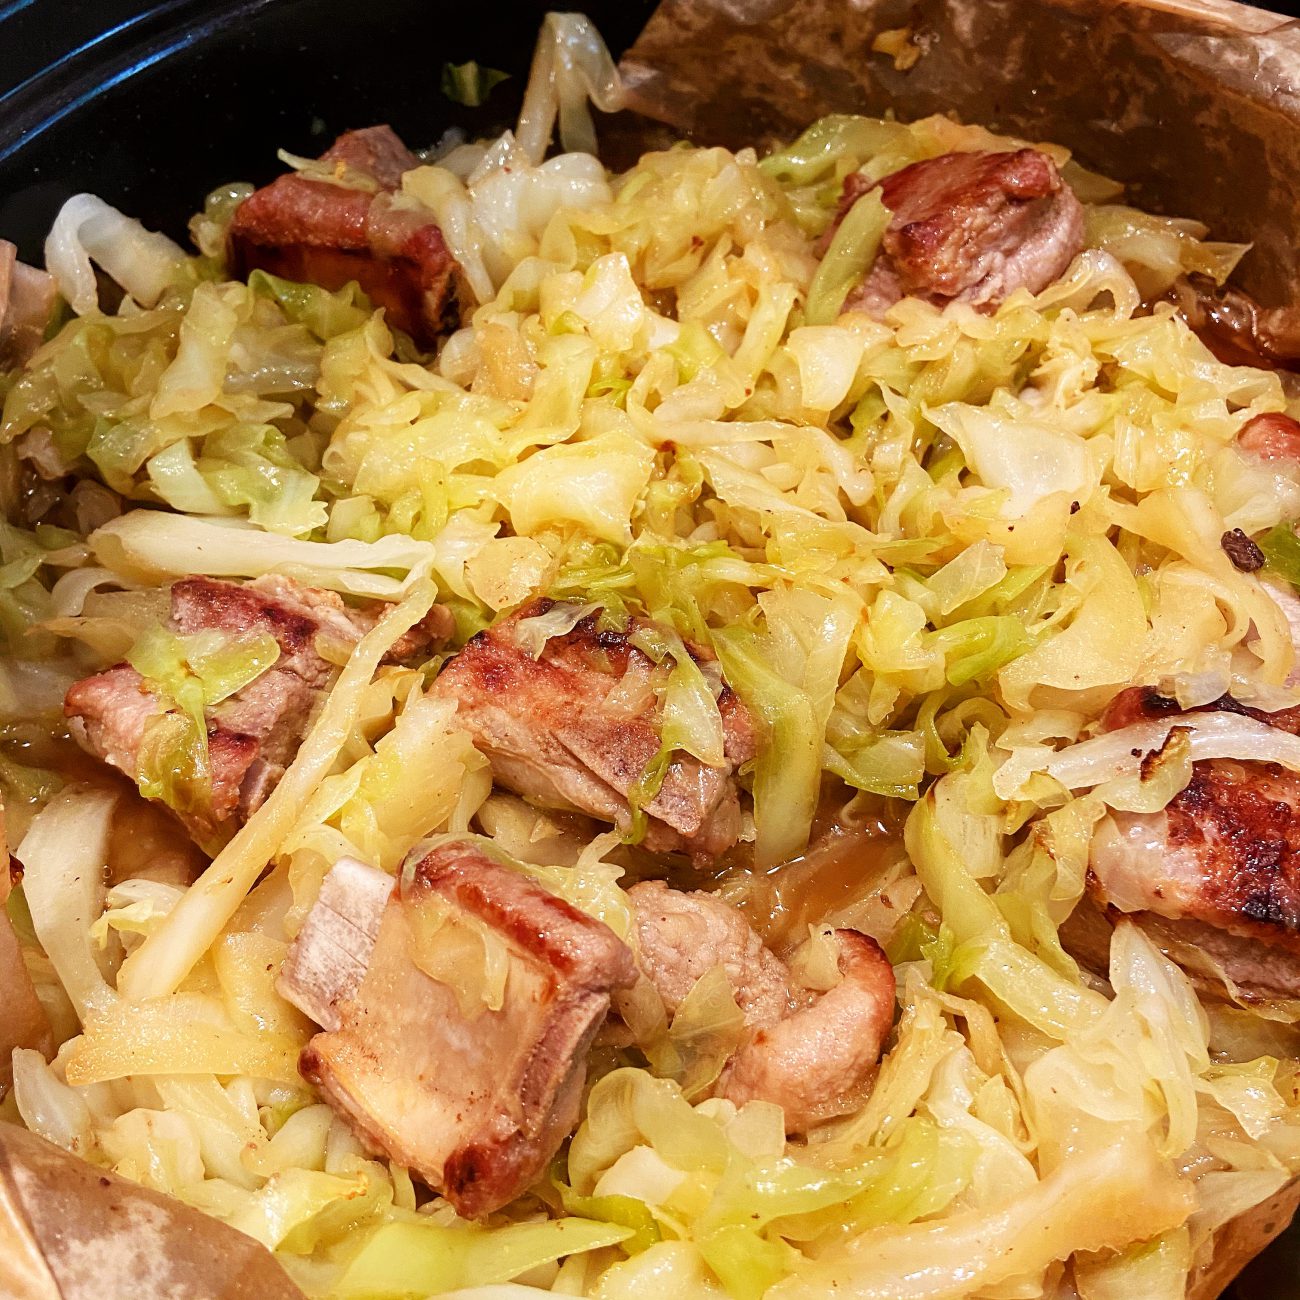 Cabbage braised with pork ribs (No water added)